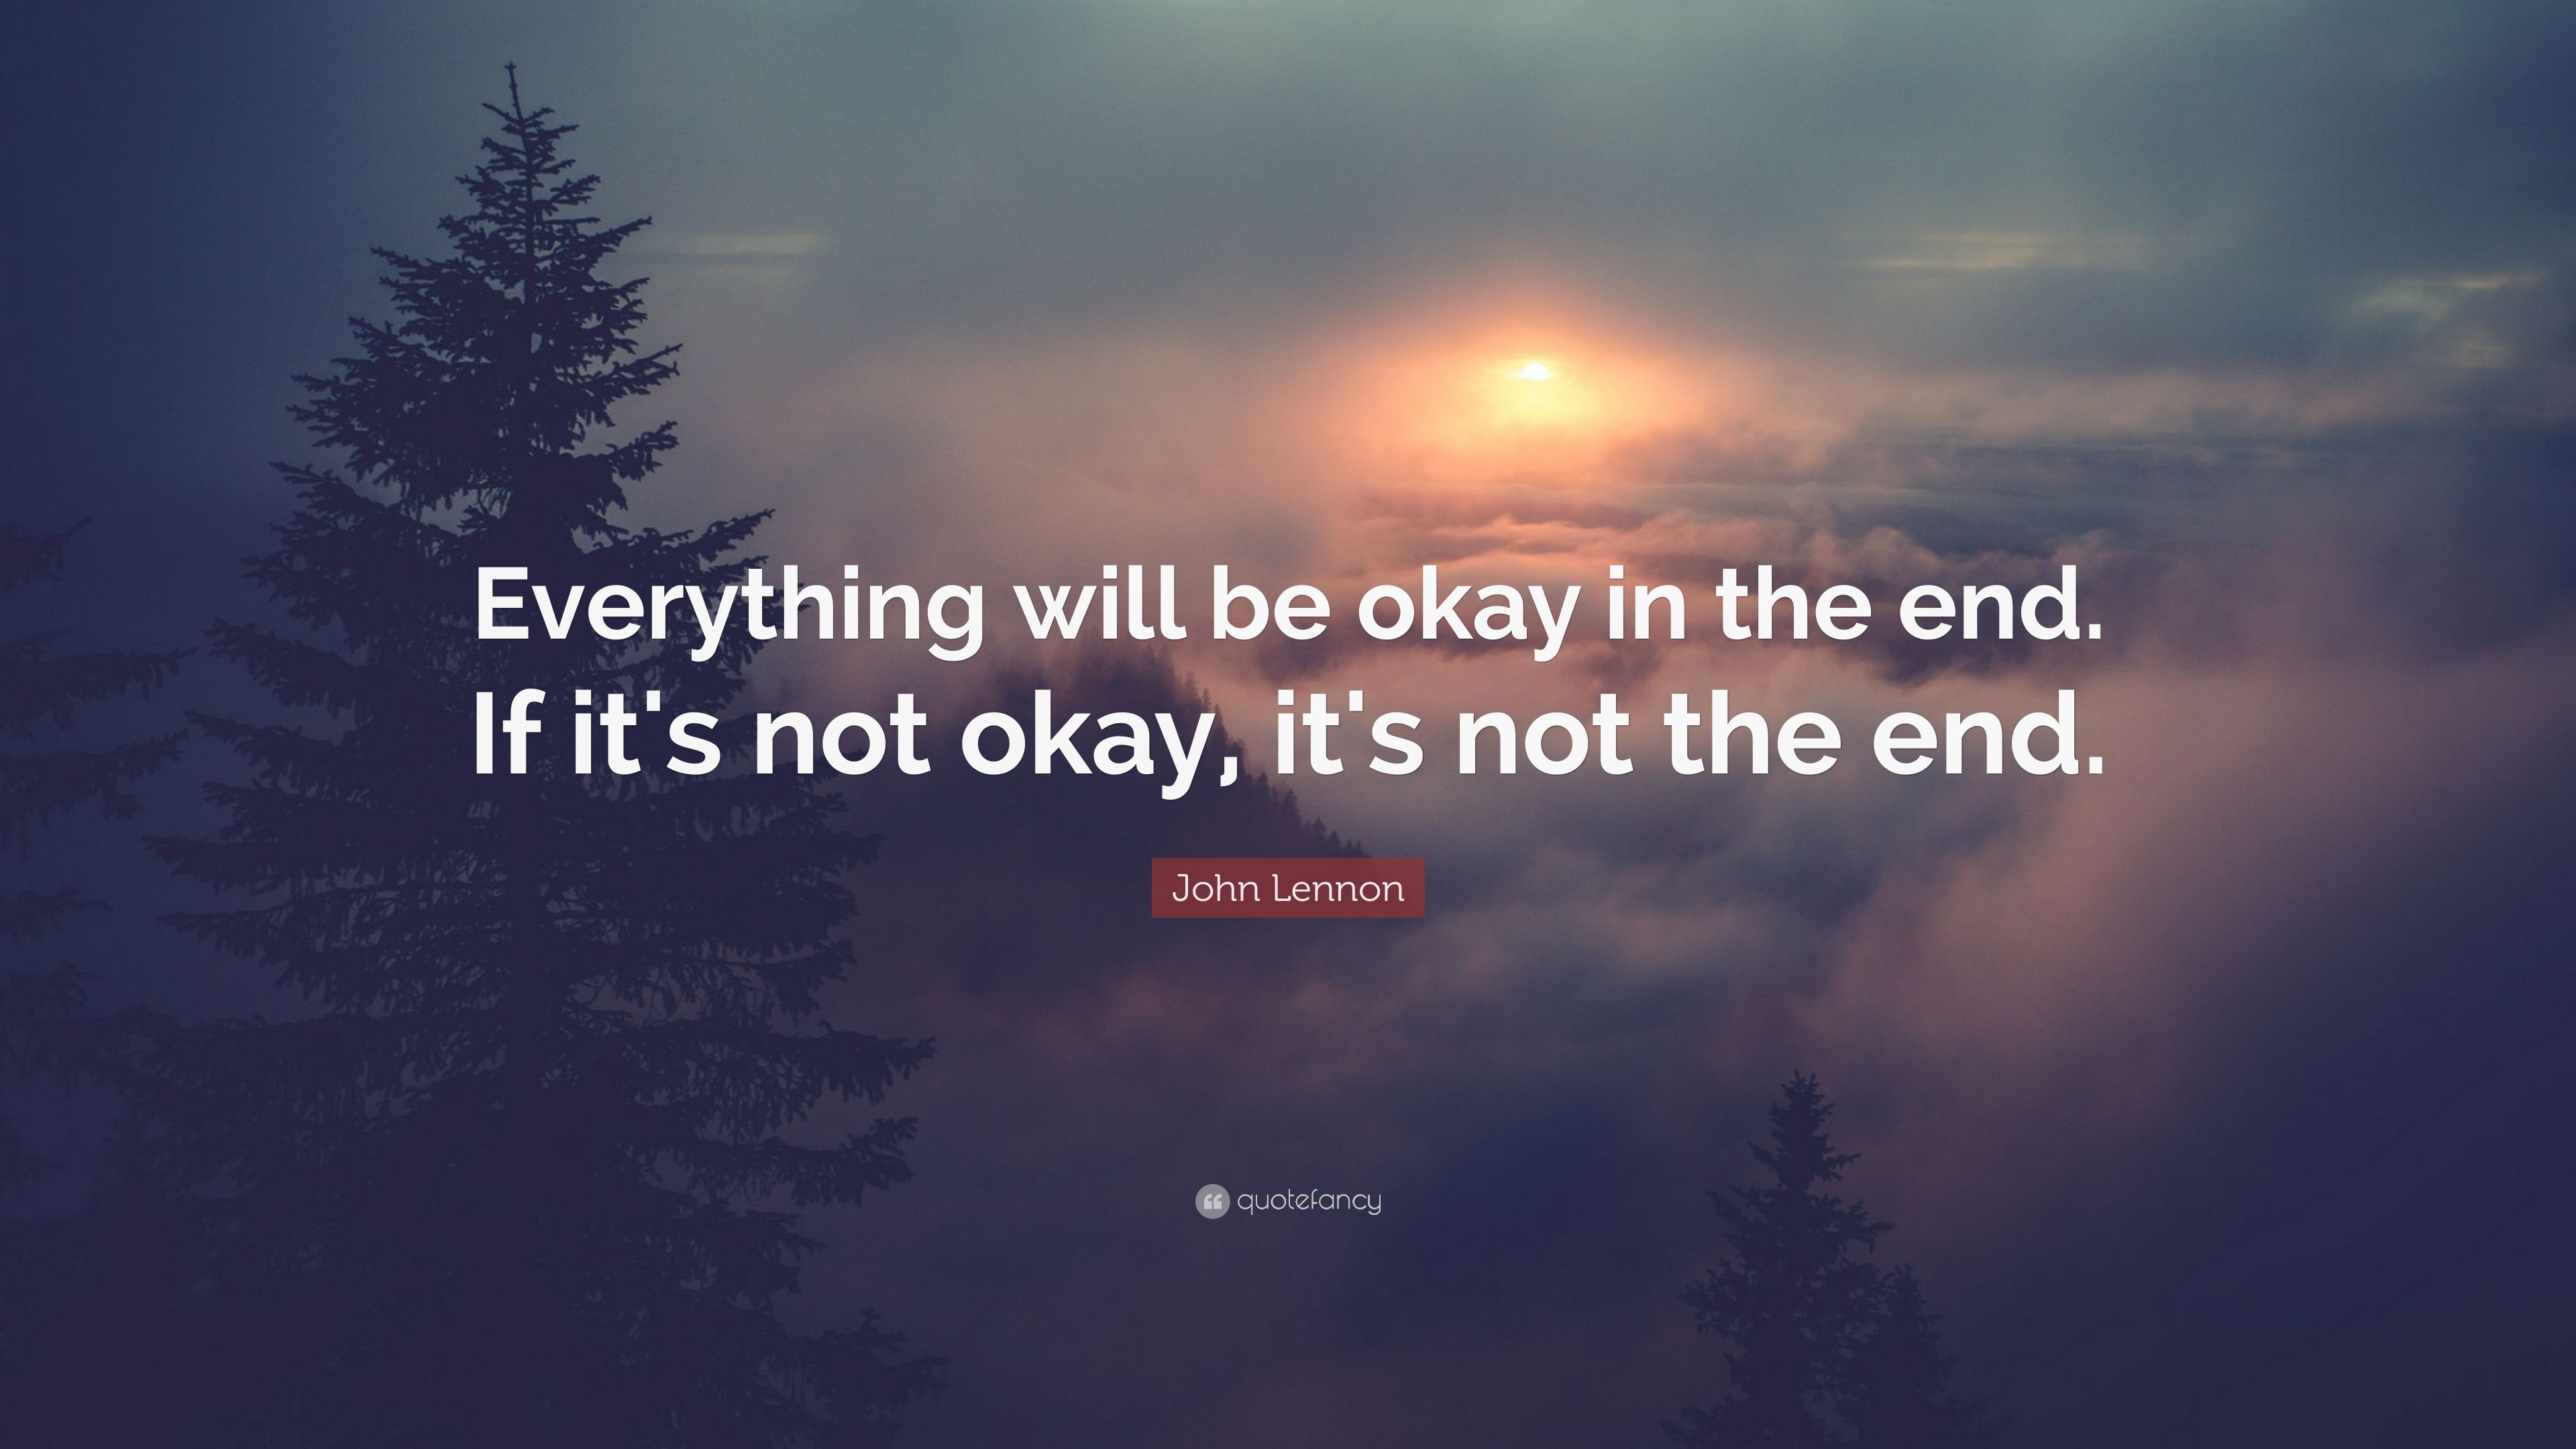 John Lennon Quote: “Everything will be okay in the end. If it's not okay, it's not